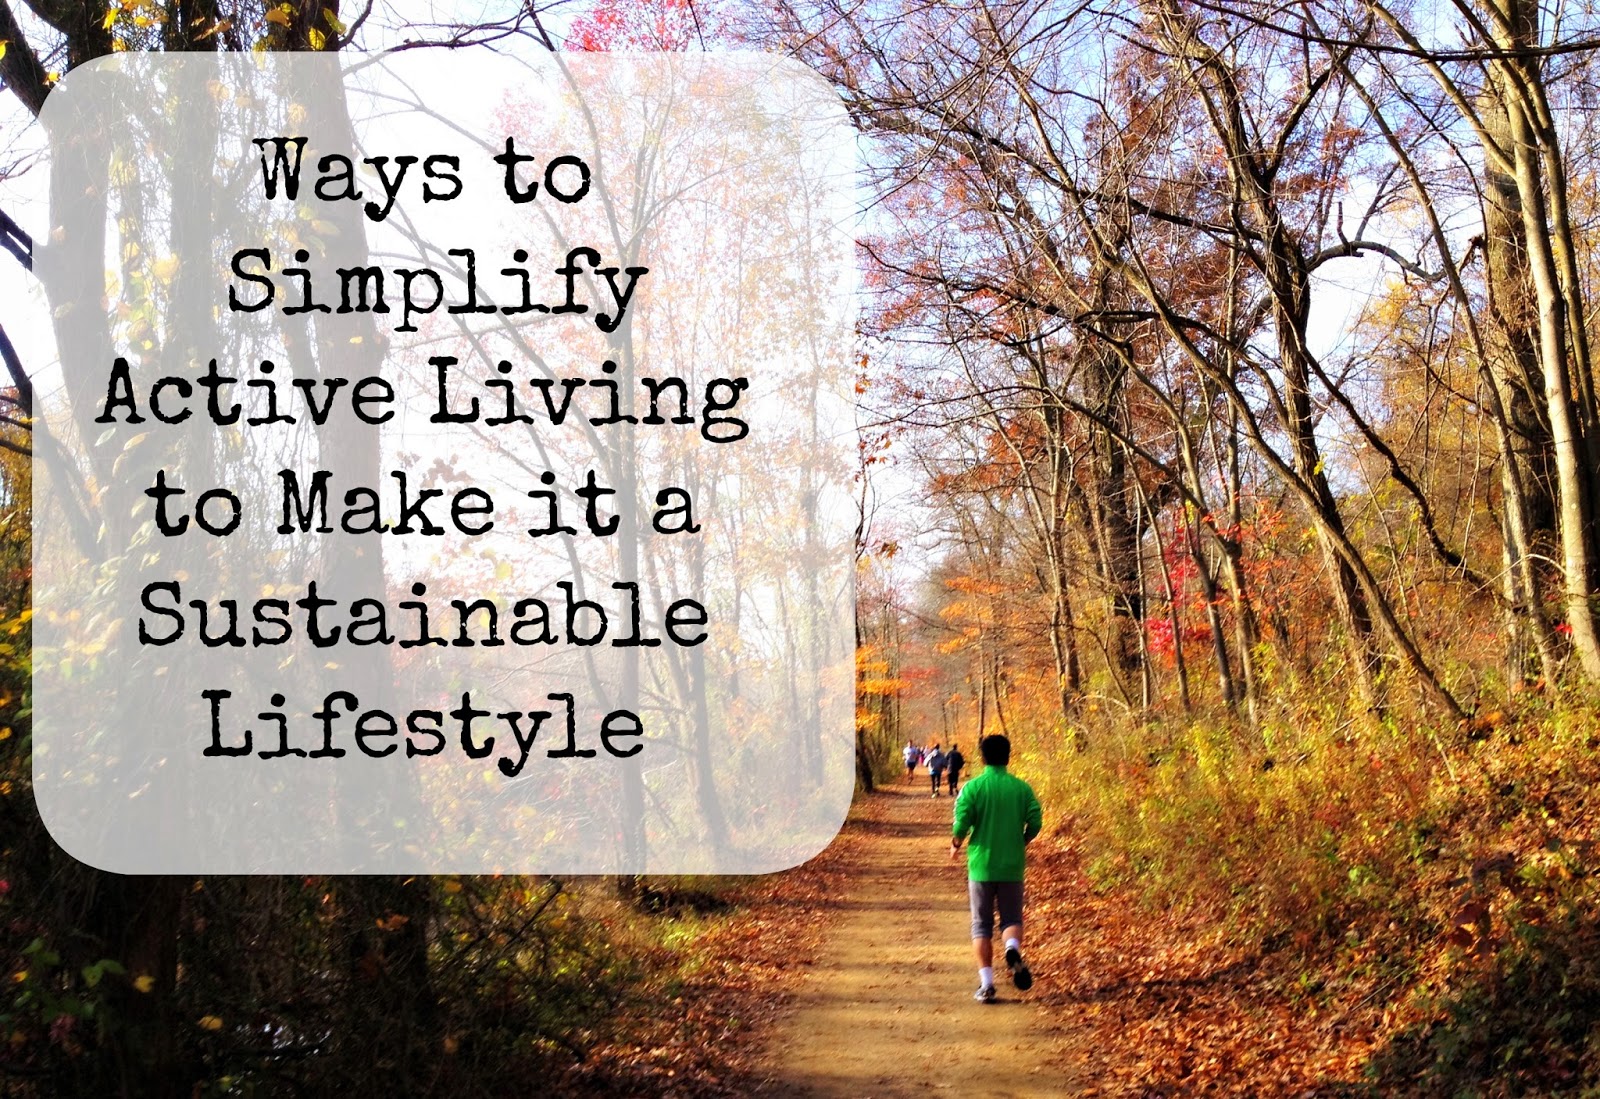 Ways to Simplify Active Living to Make it a Sustainable Lifestyle